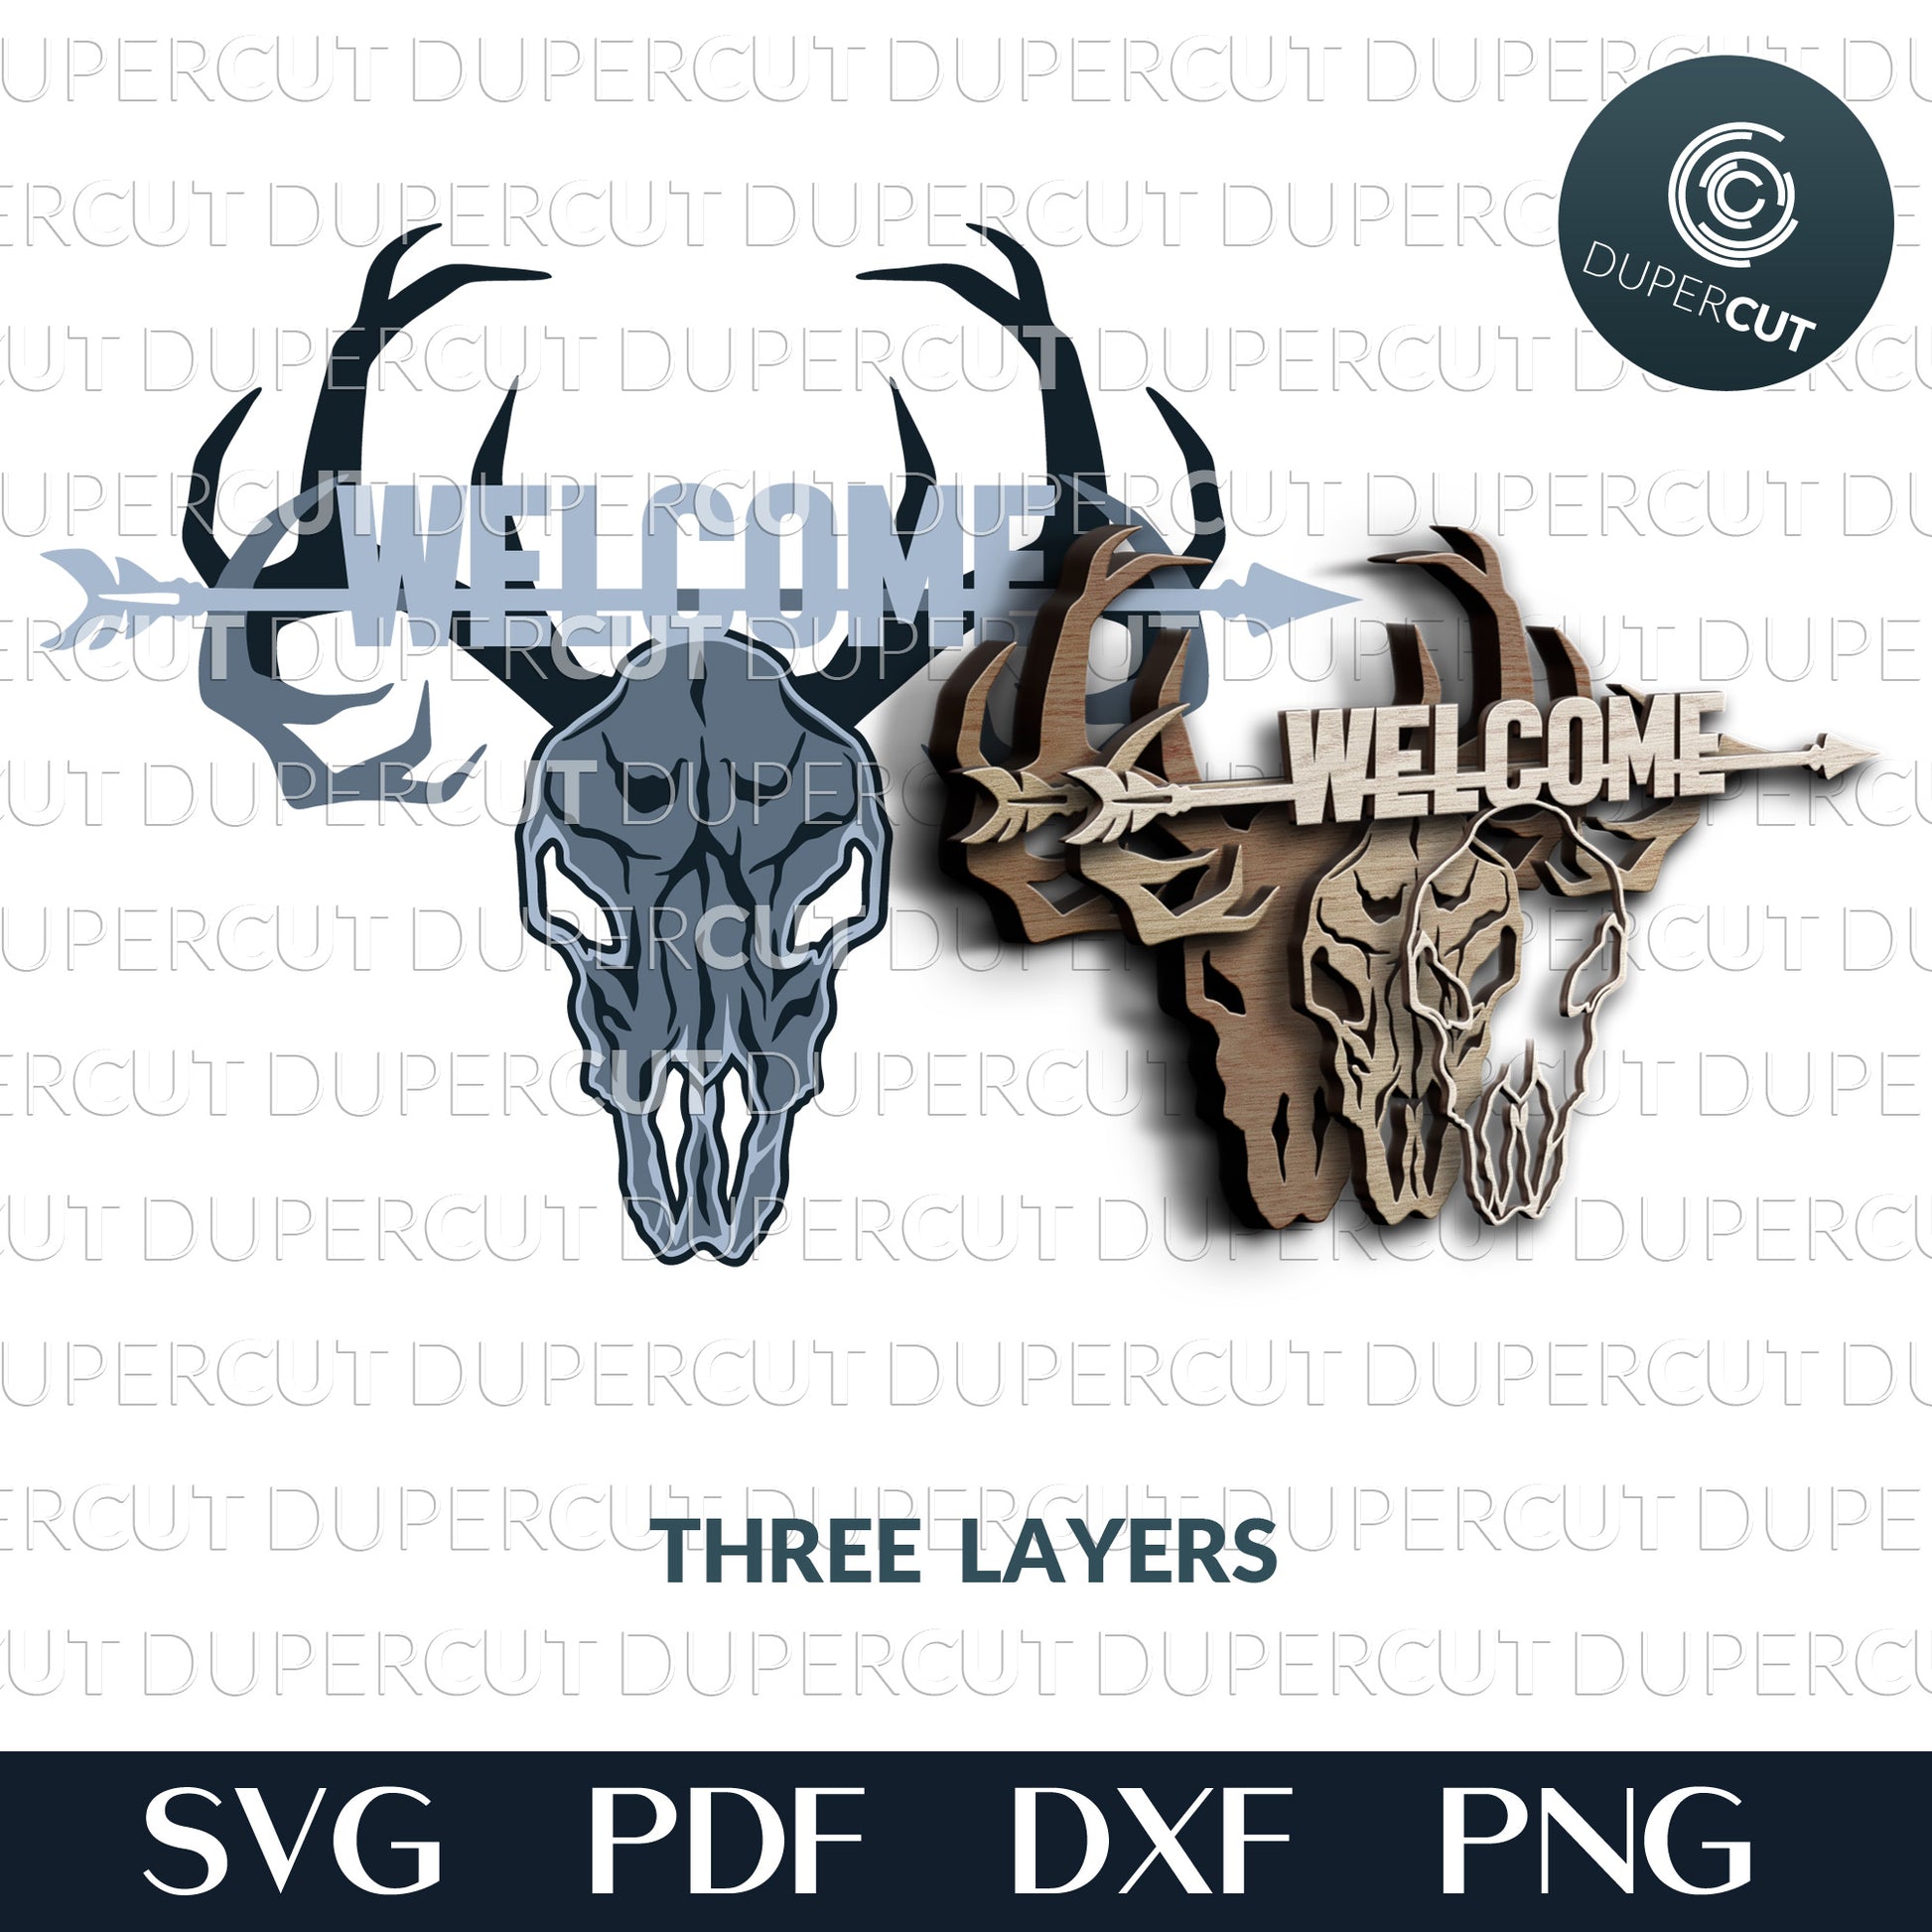 Deer skull welcome sign - Hunting cabin decoration - SVG PDF DXF laser cutting files for Glowforge, Cricut, Silhouette Cameo, CNC plasma machines by DuperCut